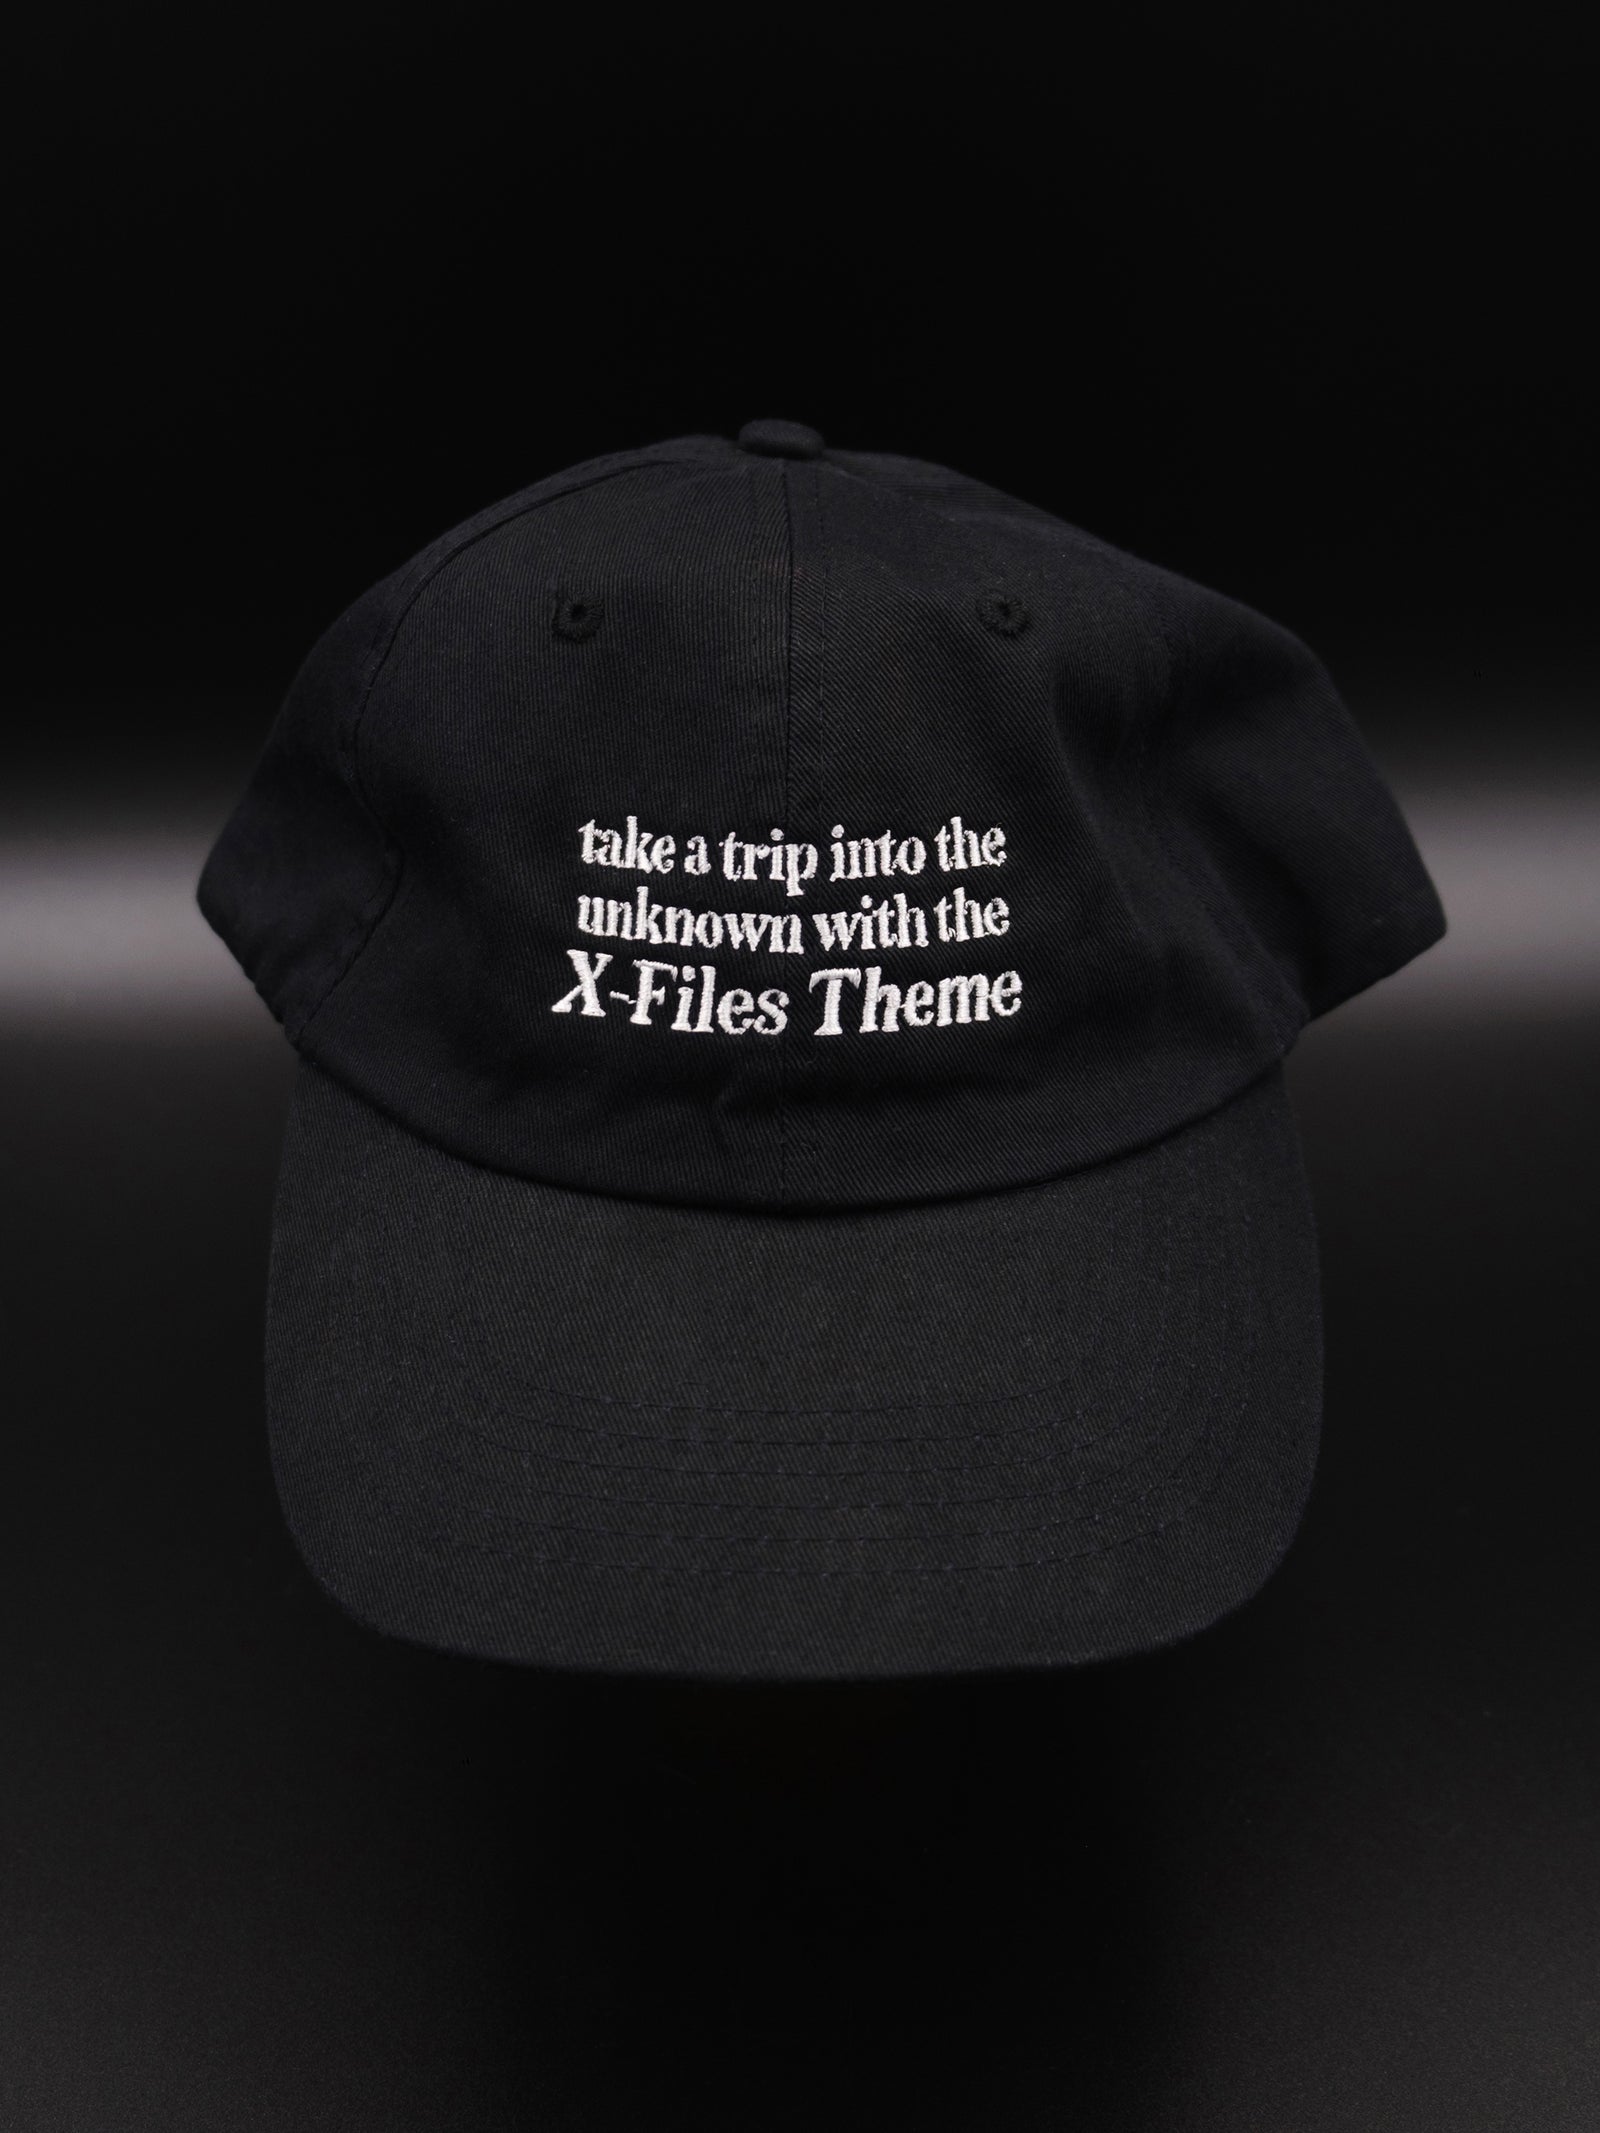 black hat with white embroidered text reads "take a trip into the unknown with the X-Files theme"